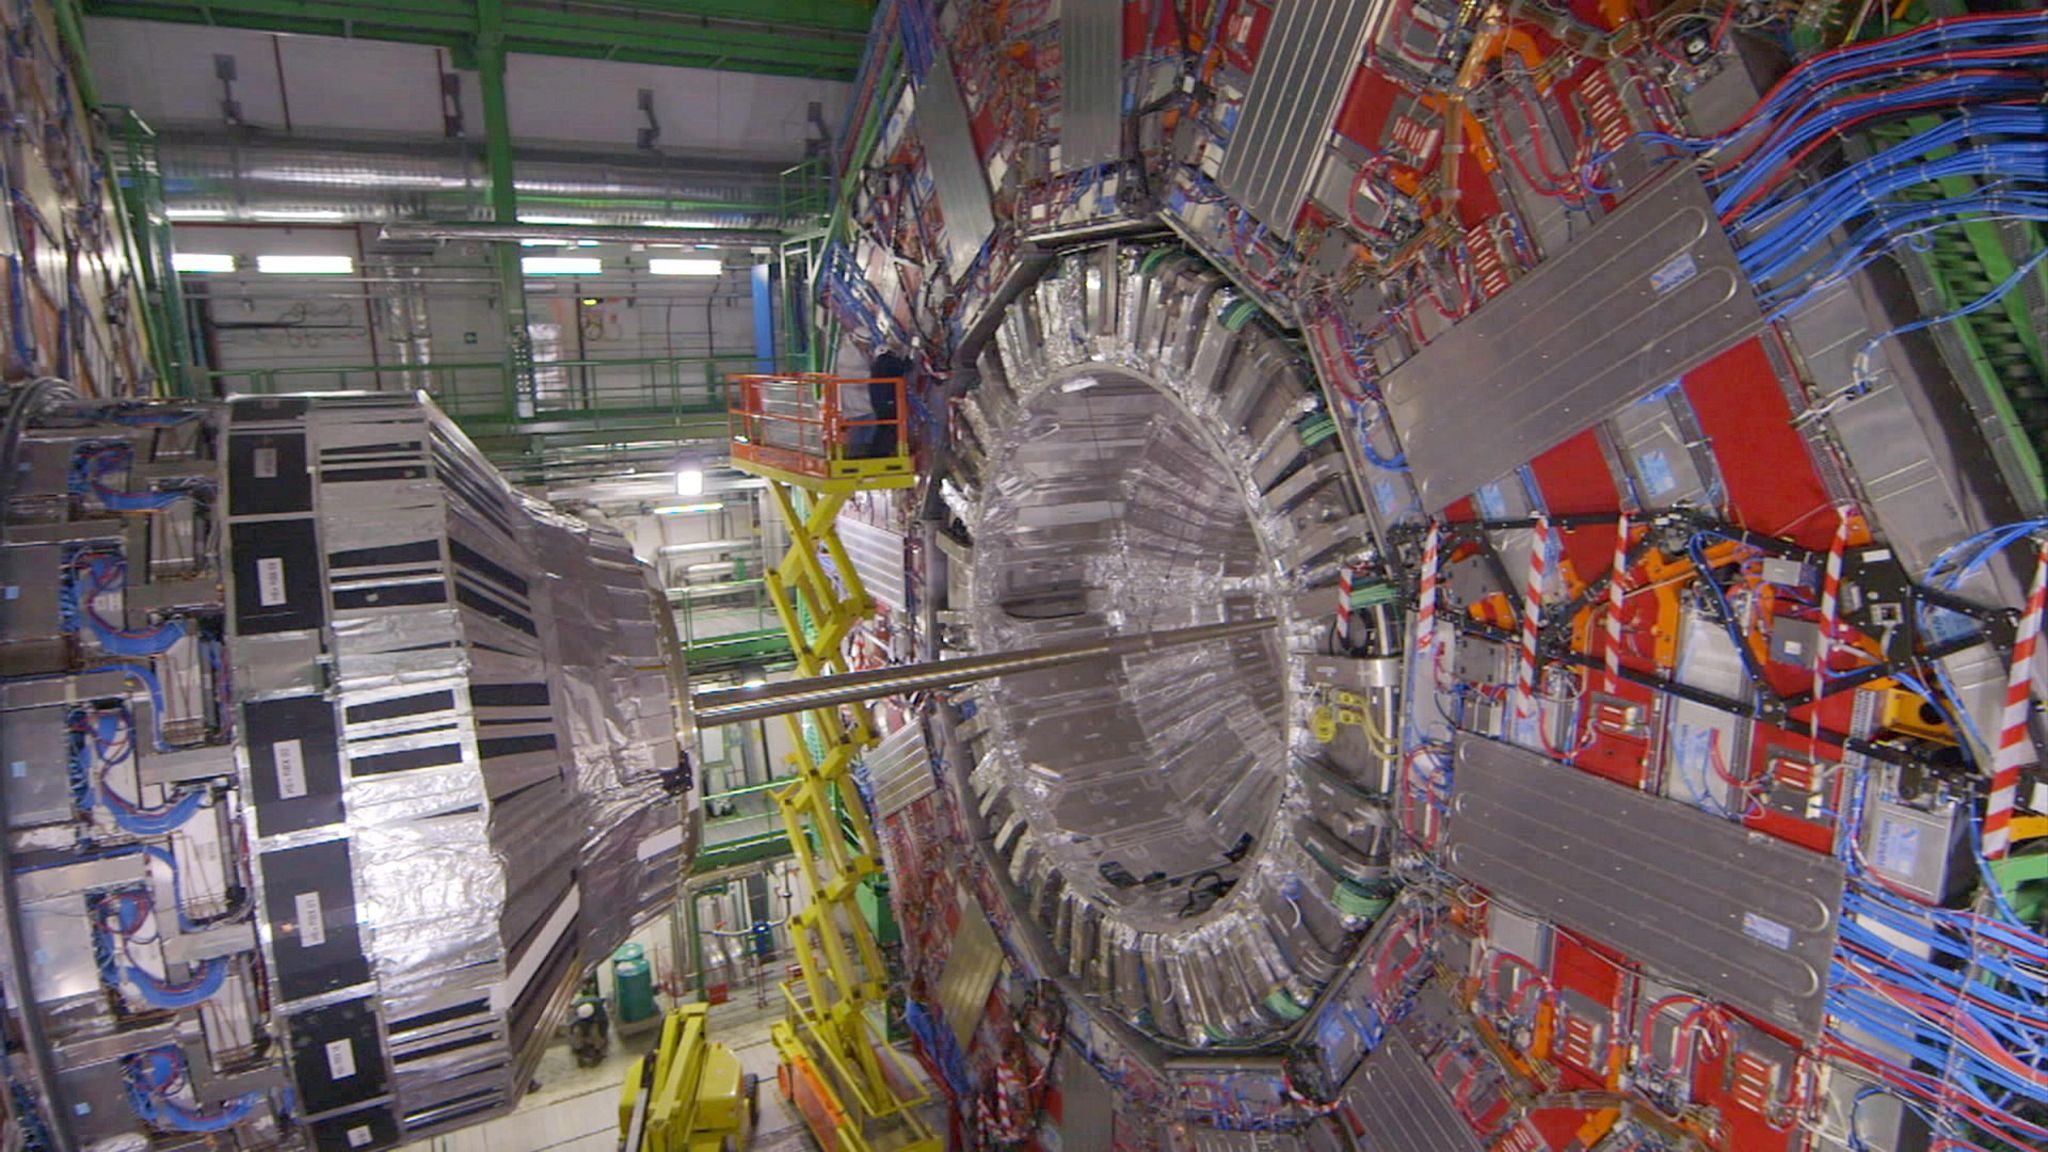 Compact Muon Solenoid (CMS) at Cern